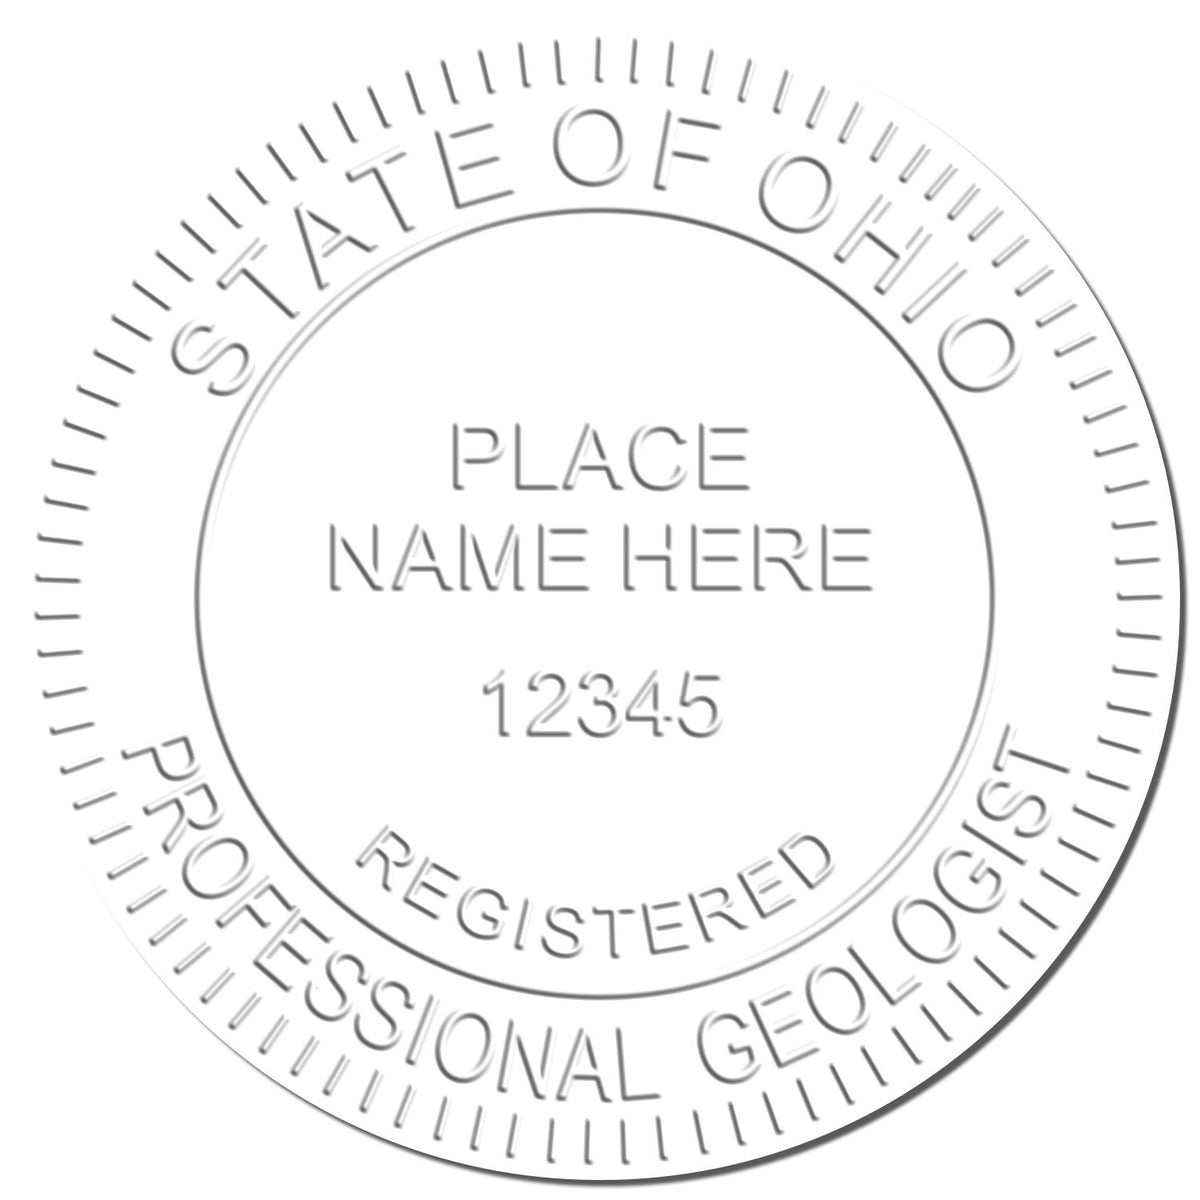 A photograph of the State of Ohio Extended Long Reach Geologist Seal stamp impression reveals a vivid, professional image of the on paper.